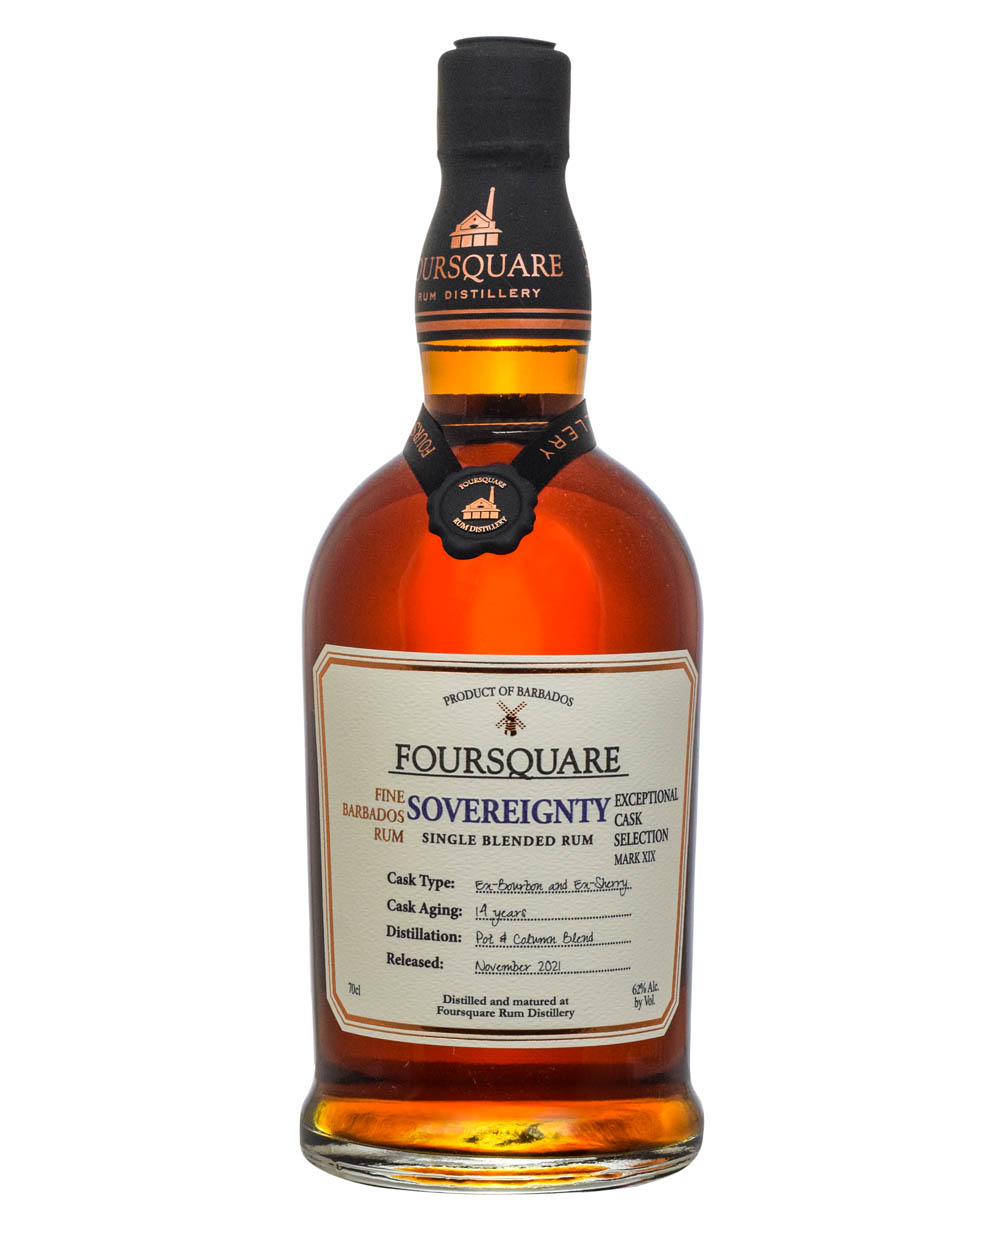 Foursquare 14 Years Old Sovereignty Rum 2021 Must Have Malts MHM